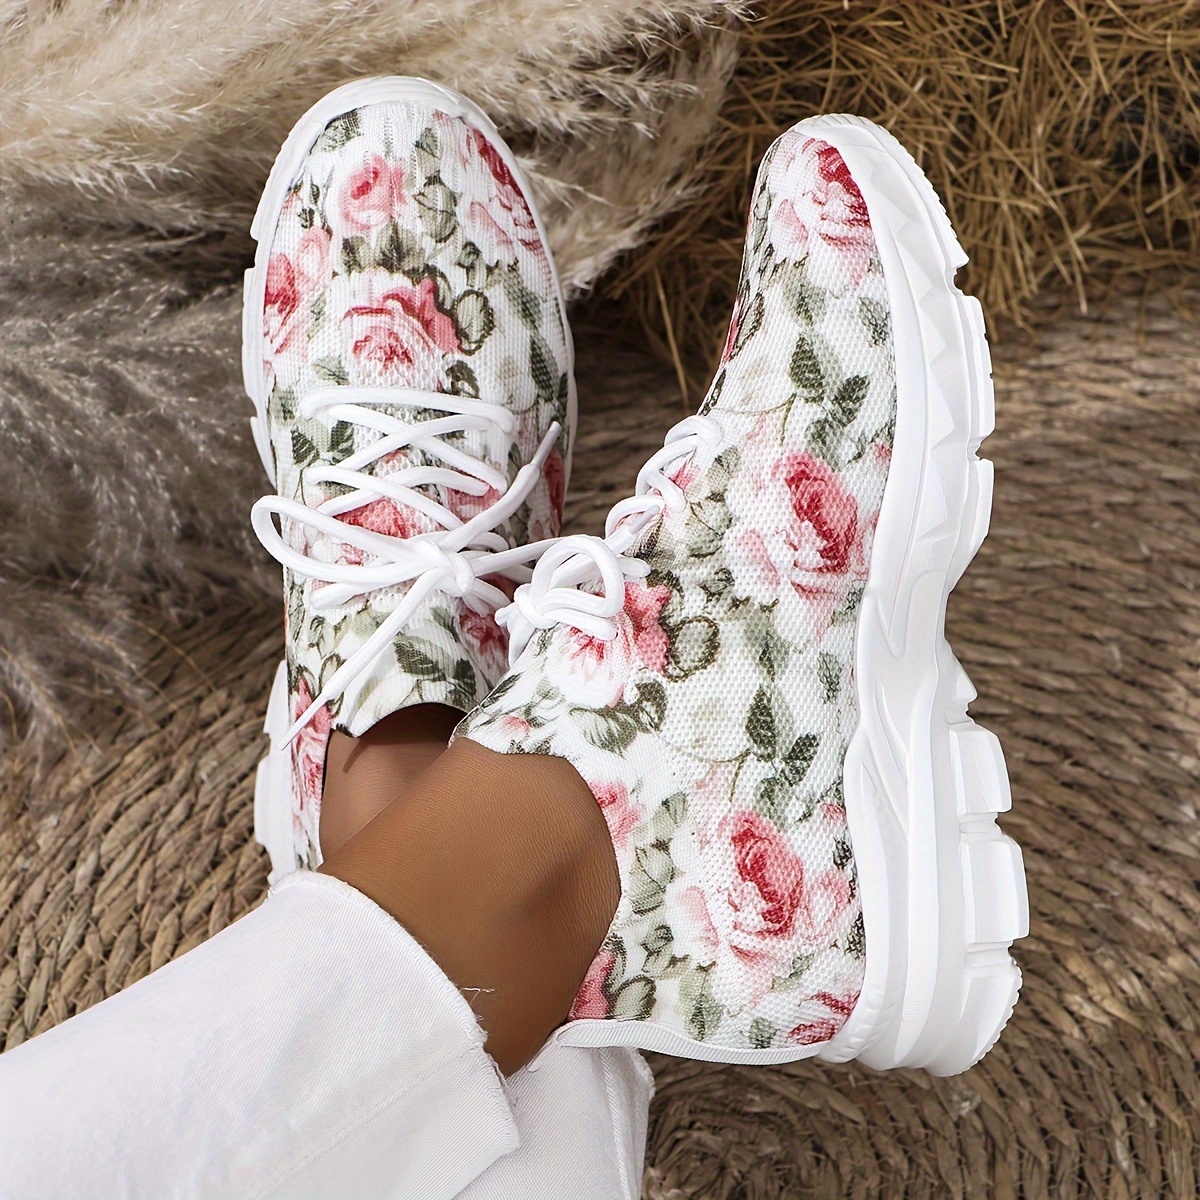 

Women's Floral Print Fashion Sneakers, Lightweight & Breathable Walking Shoes, Platform Soft Sole Lace Up Trainers